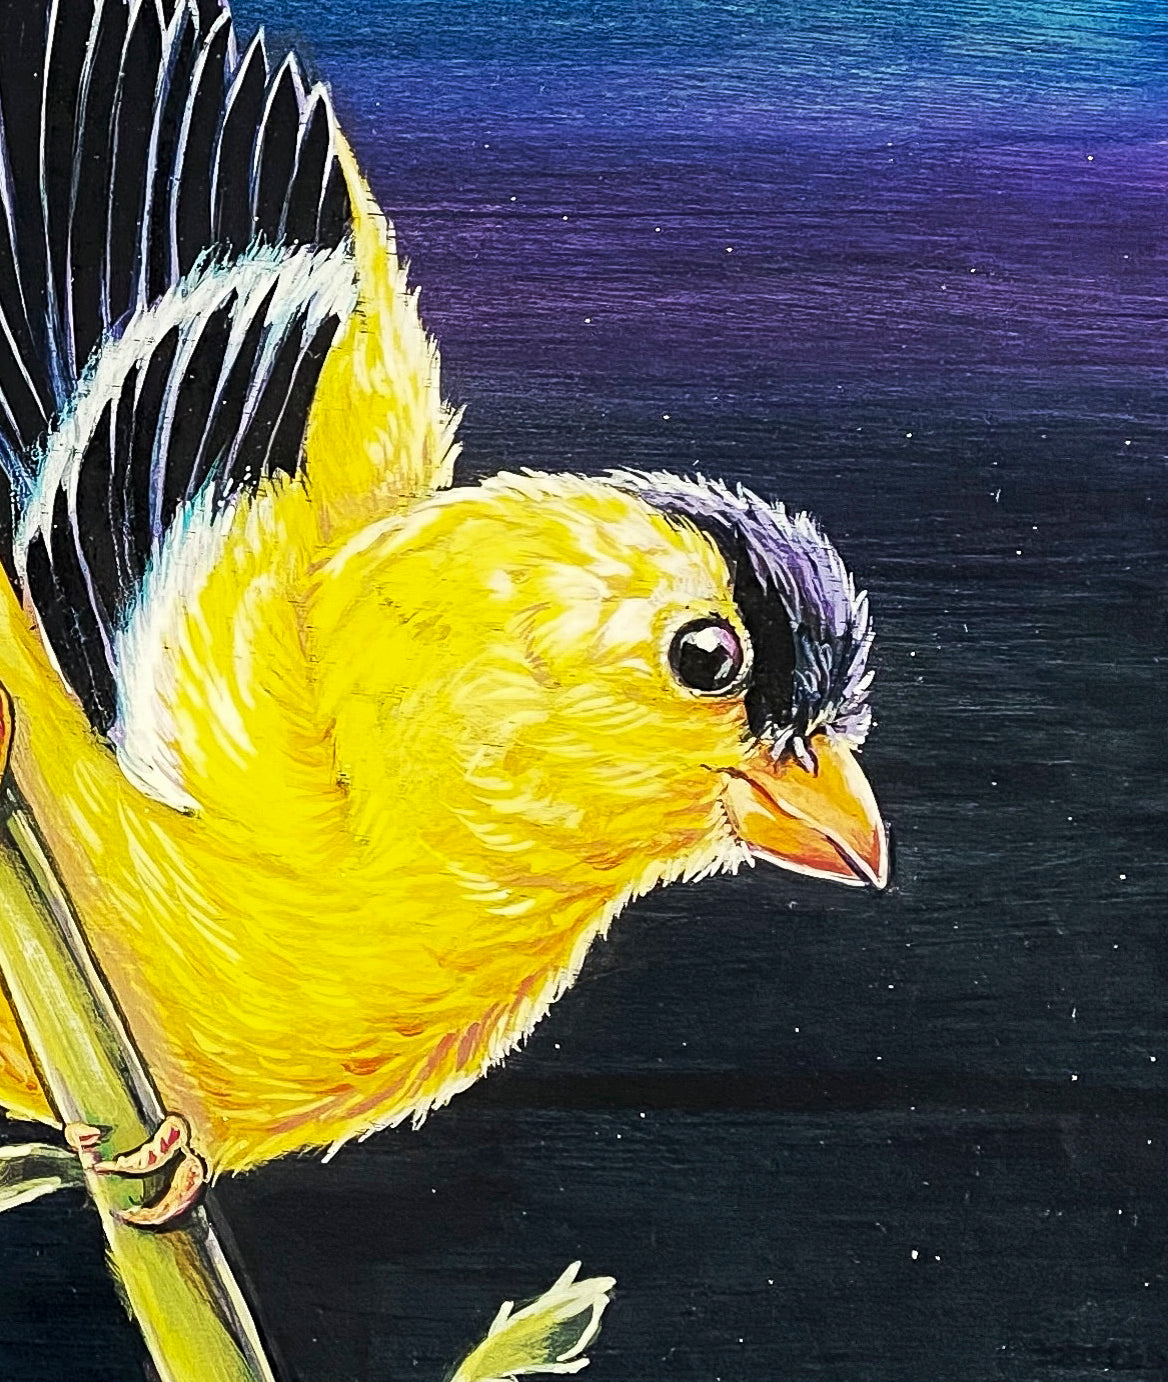 Closeup of painted Goldfinch on larger painting of colorful yellow and black Goldfinch perched on the stem of a thistle shaking its pollen against a lilac and navy metallic background; artist Marie Lavallee